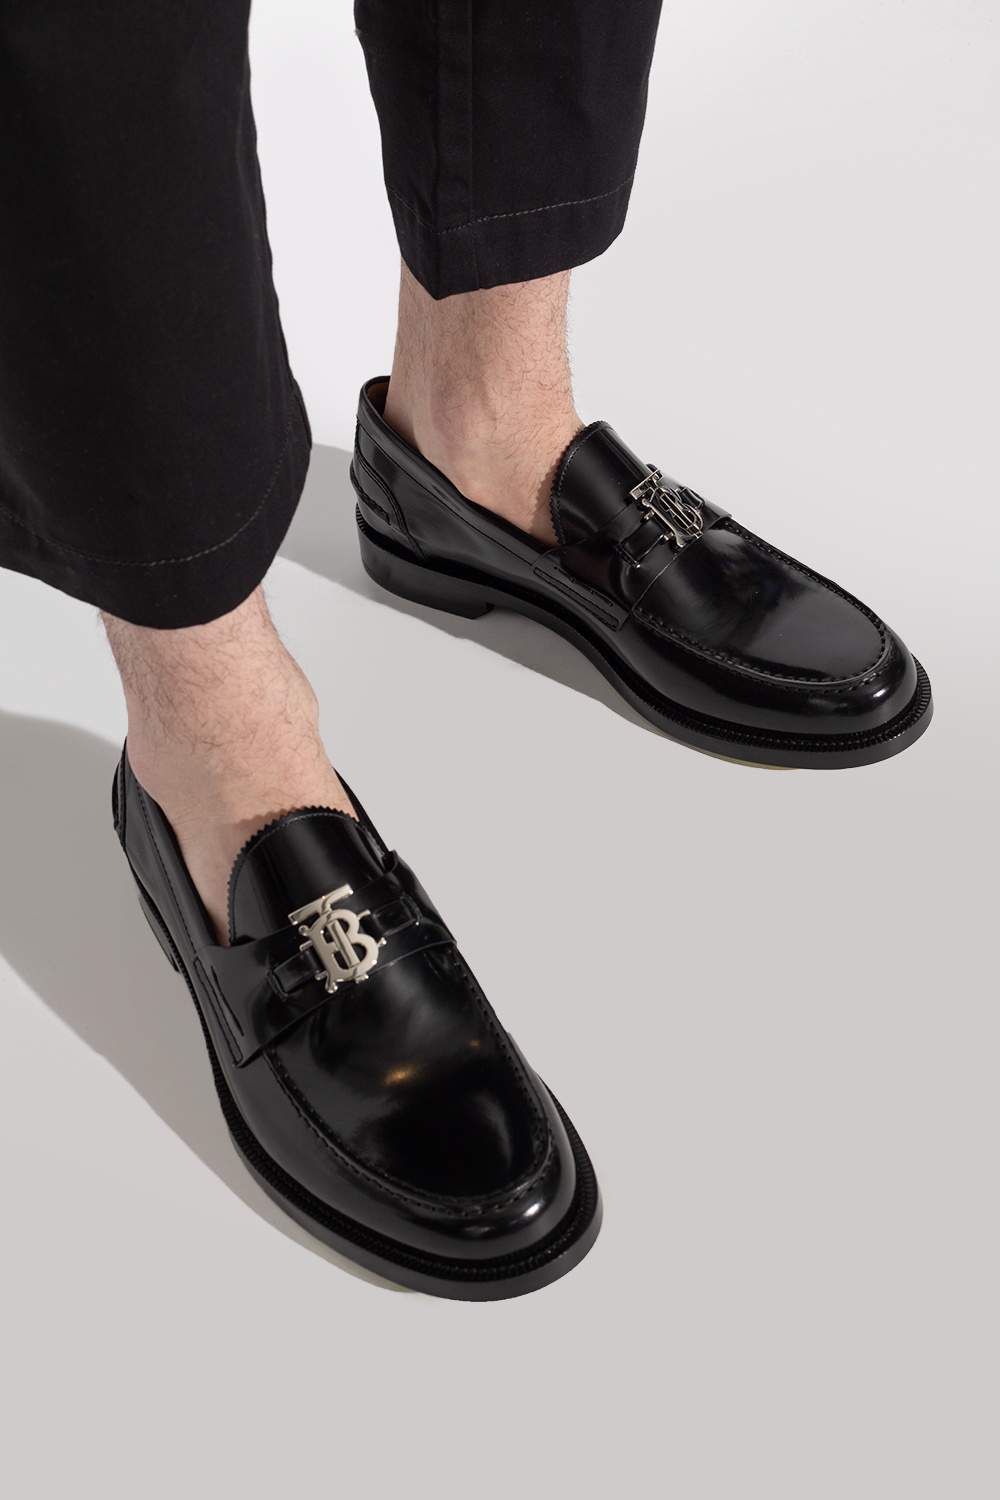 Burberry Leather loafers | Men's Shoes | Vitkac